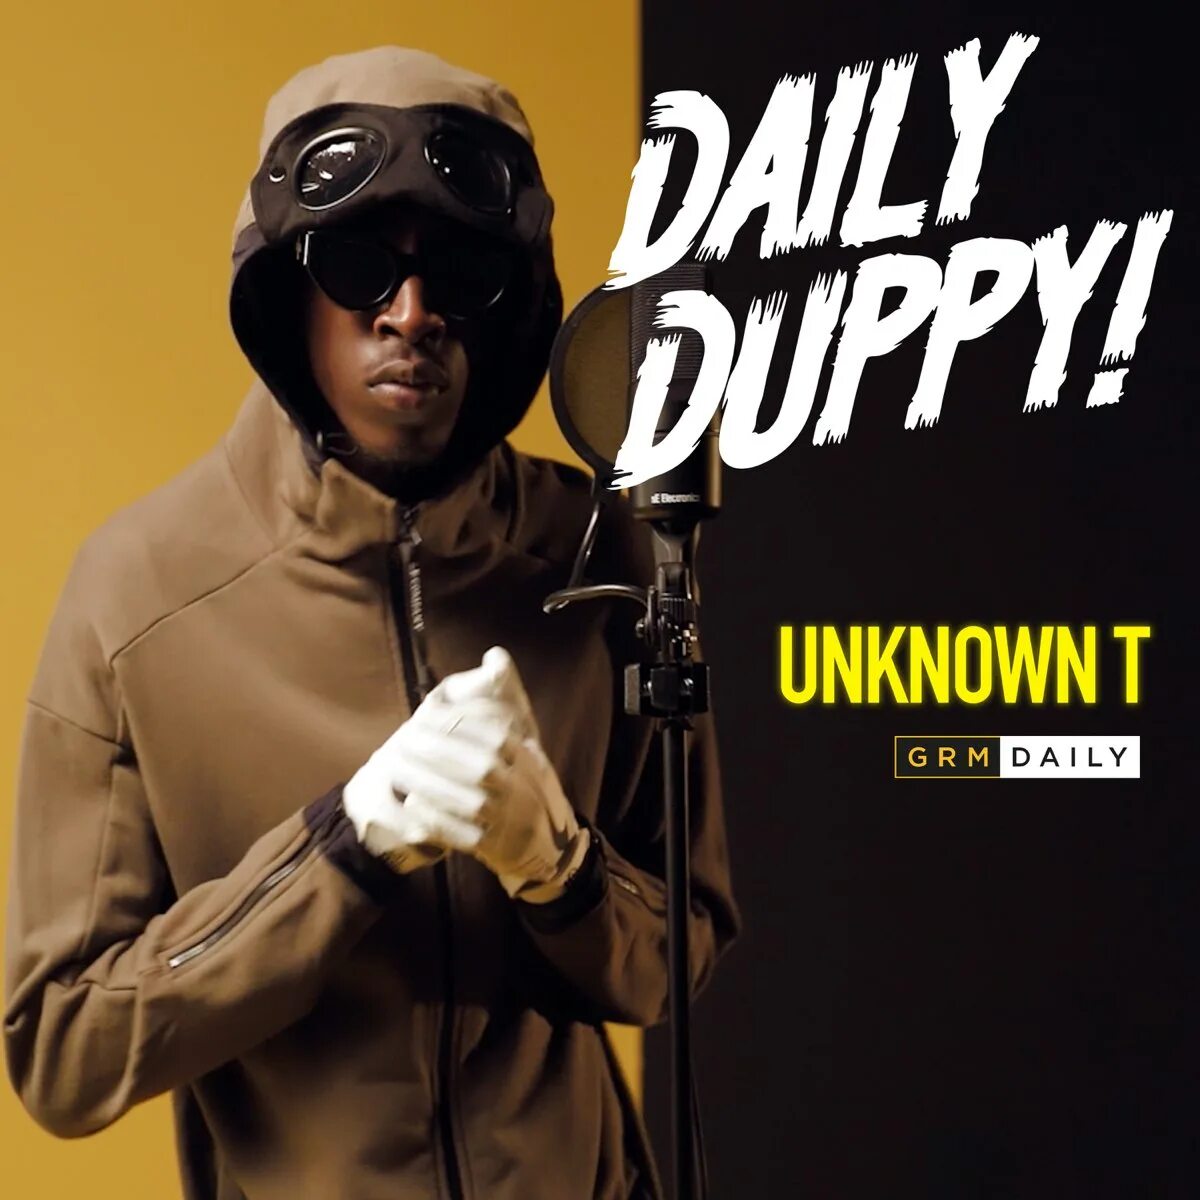 T me daily bins. Unknown t. Unknown певец. Unknown t репер. Unknown t Daily Duppy обложка.